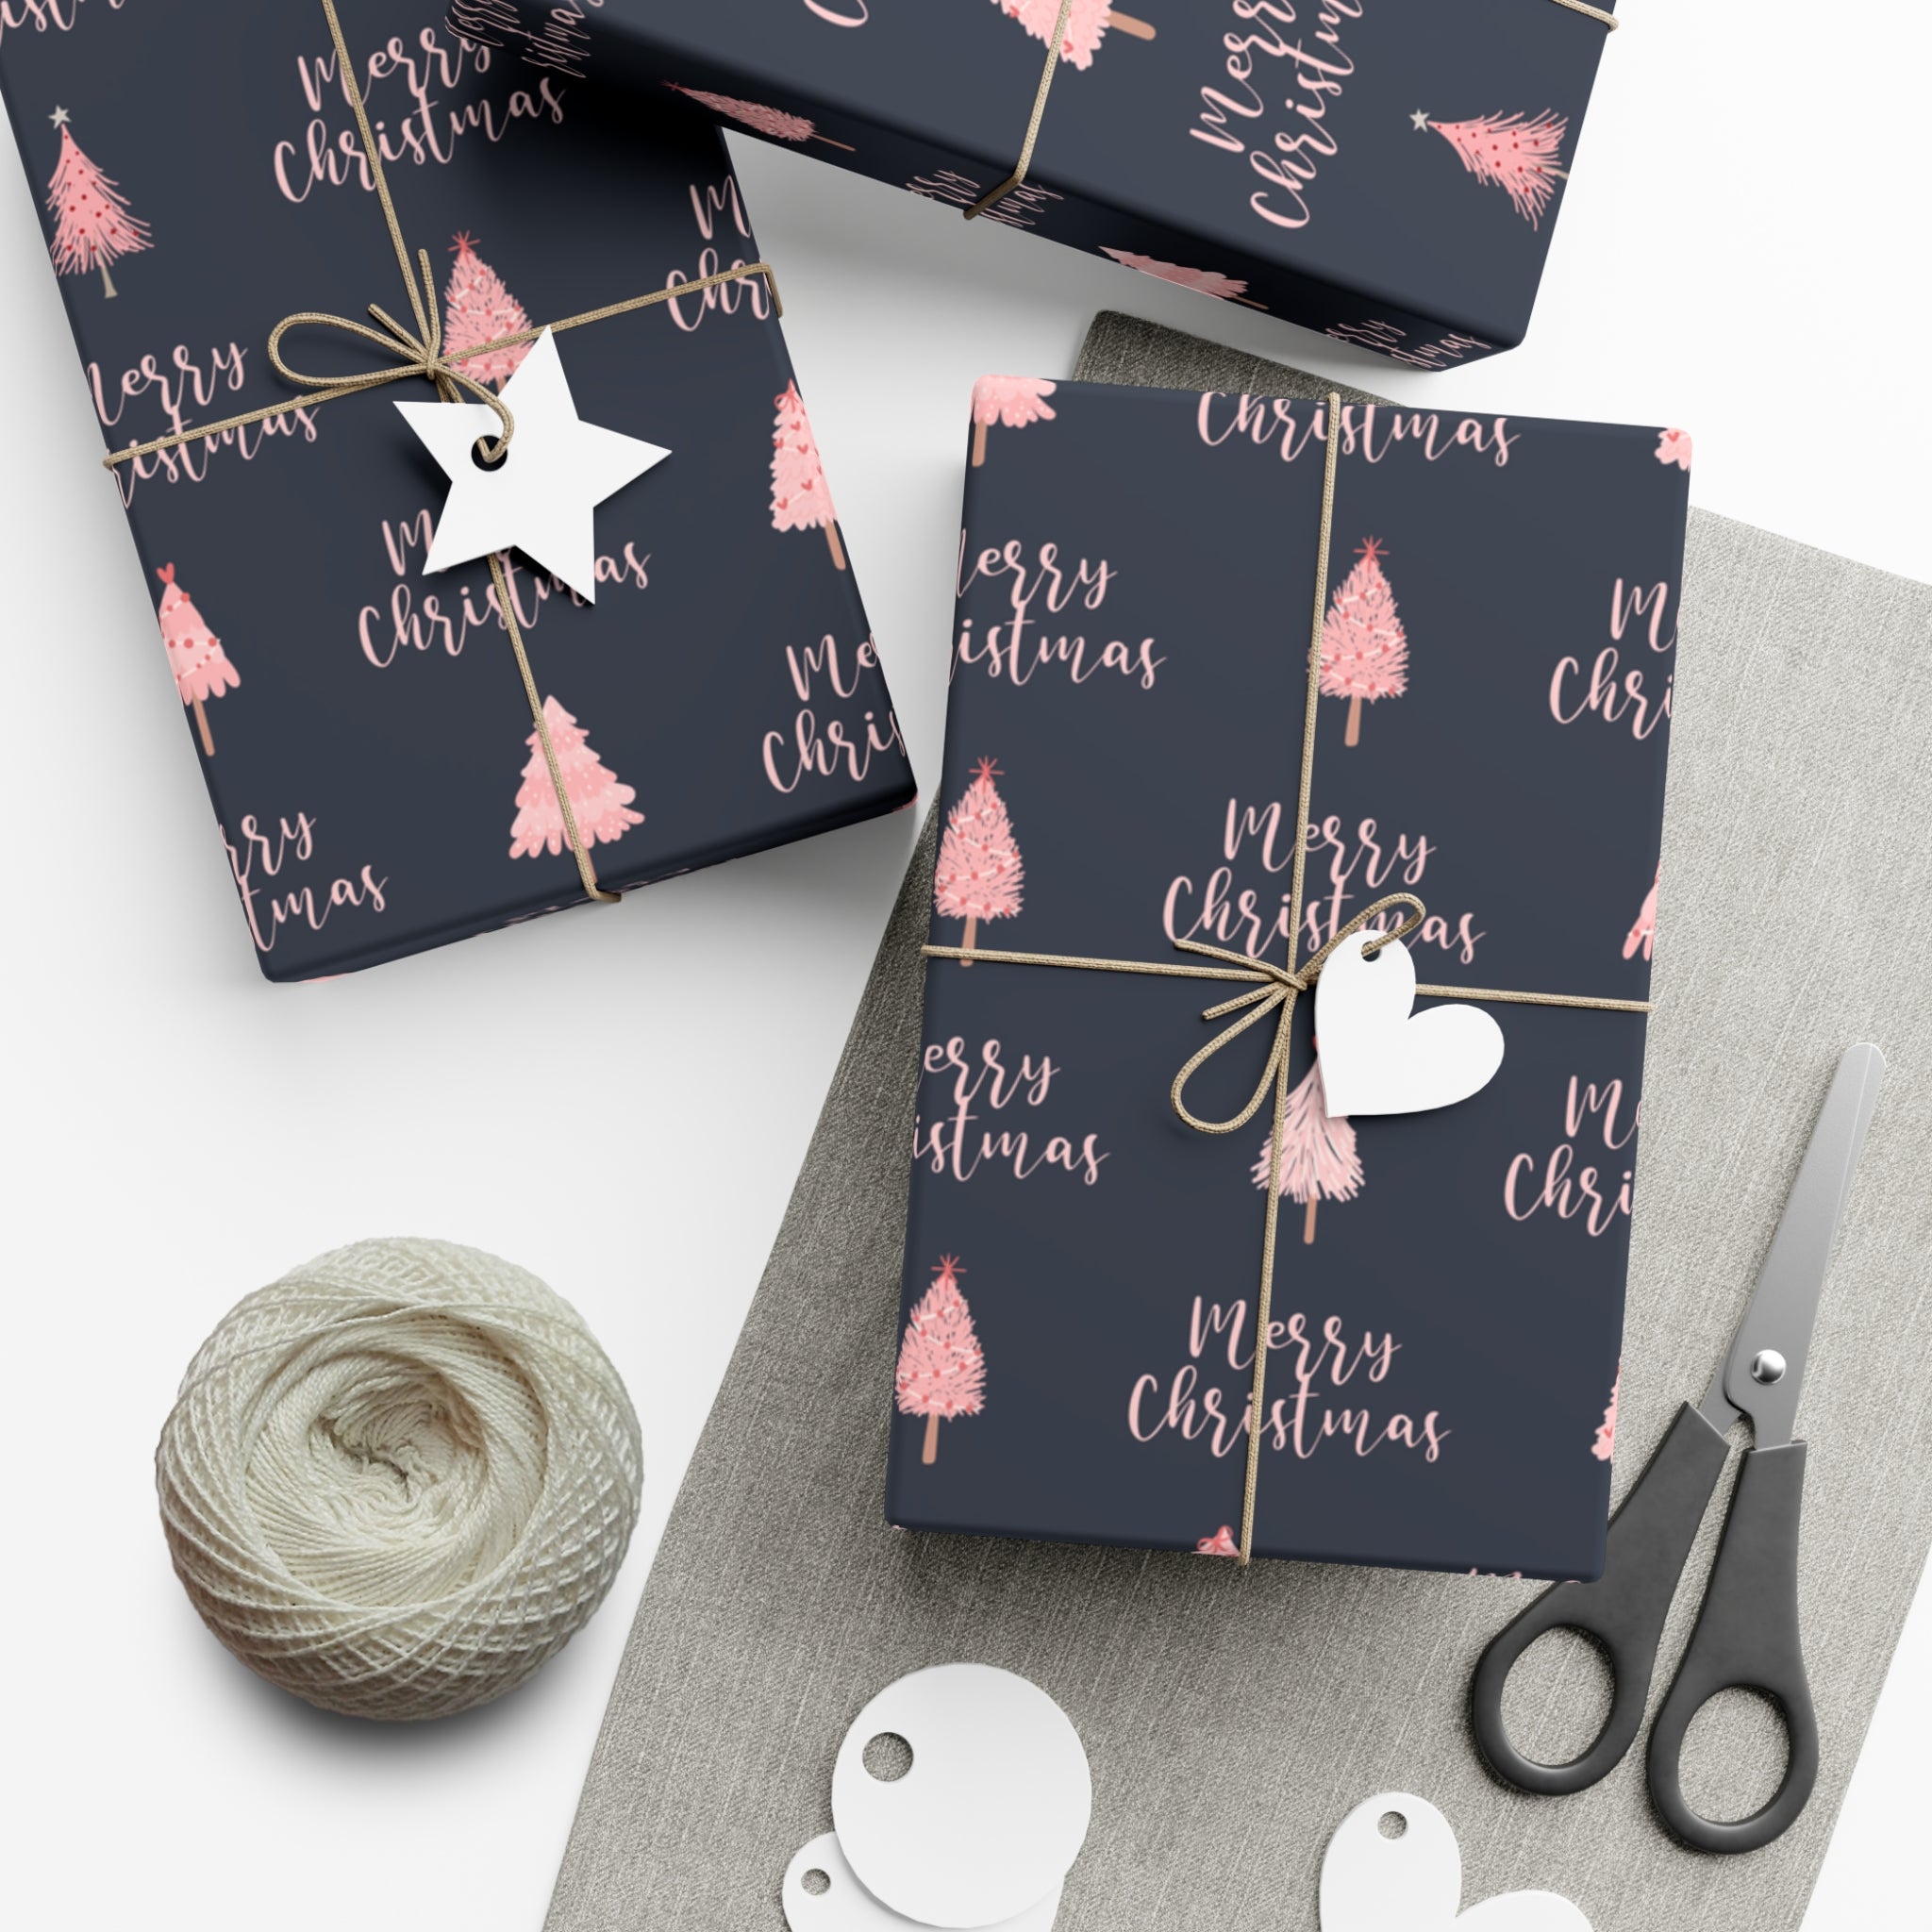 9 Cute Gift Wrapping Ideas For Christmas